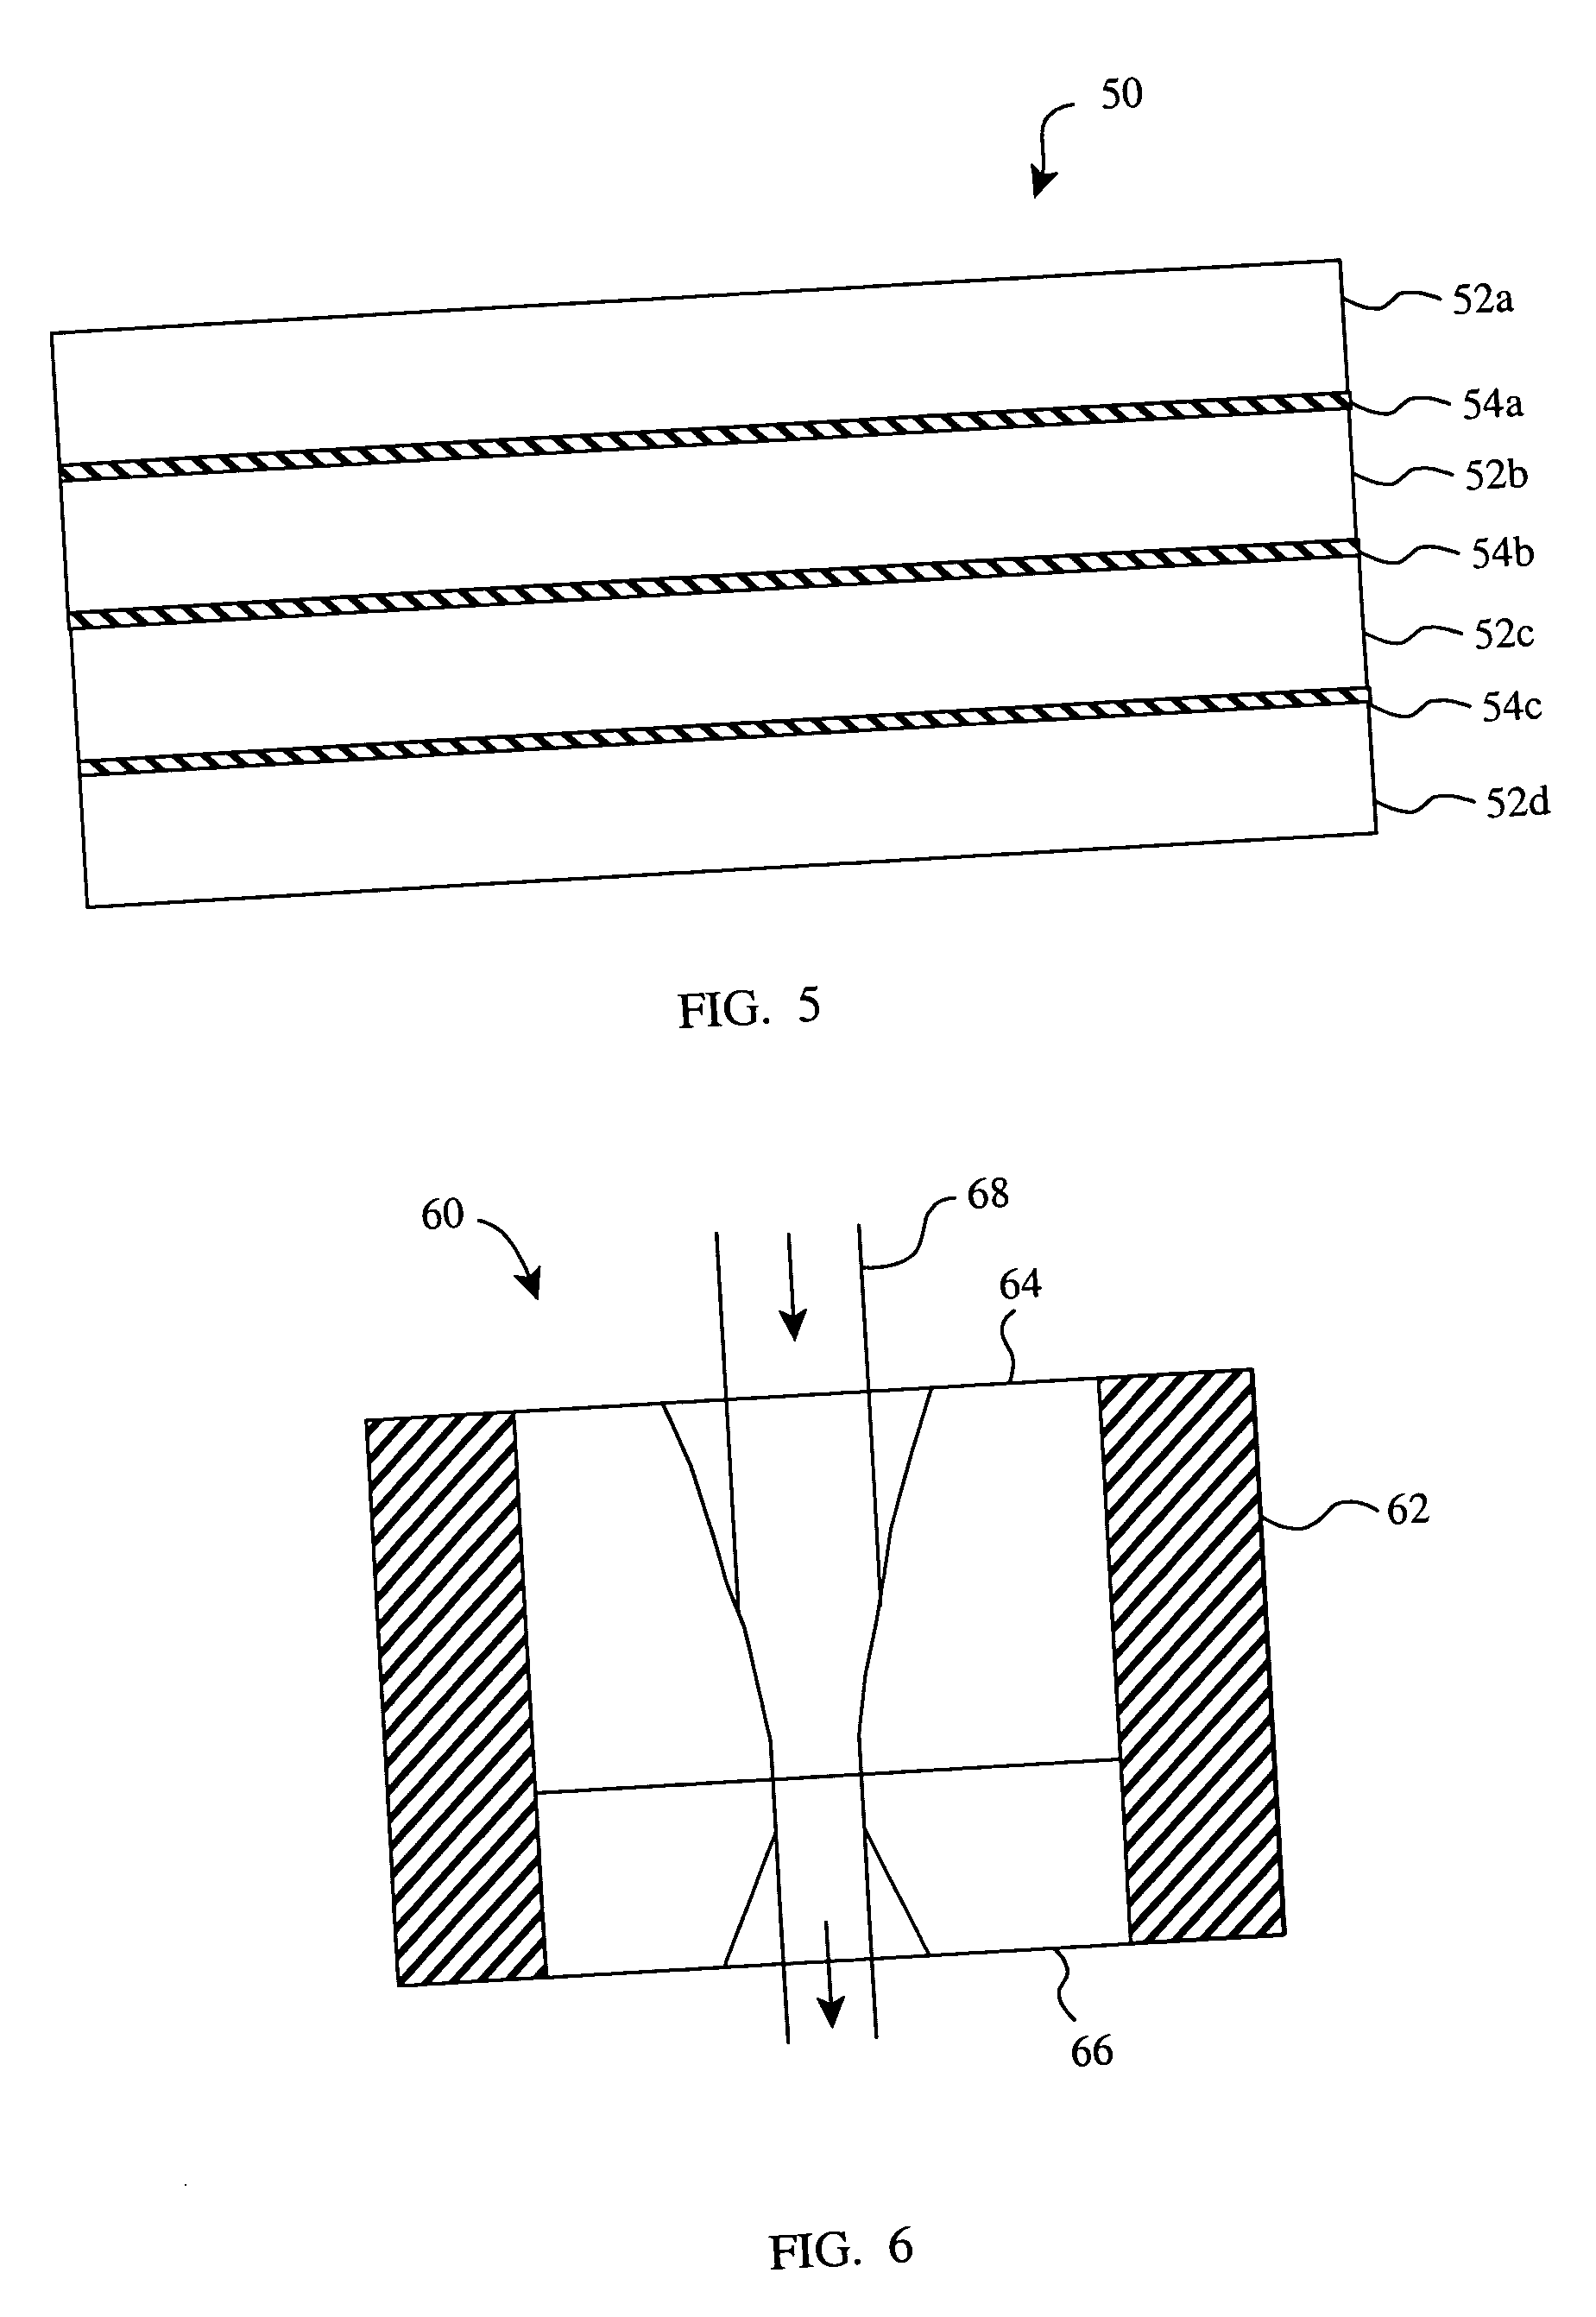 Doubled-sided and multi-layered PCD and PCBN abrasive articles